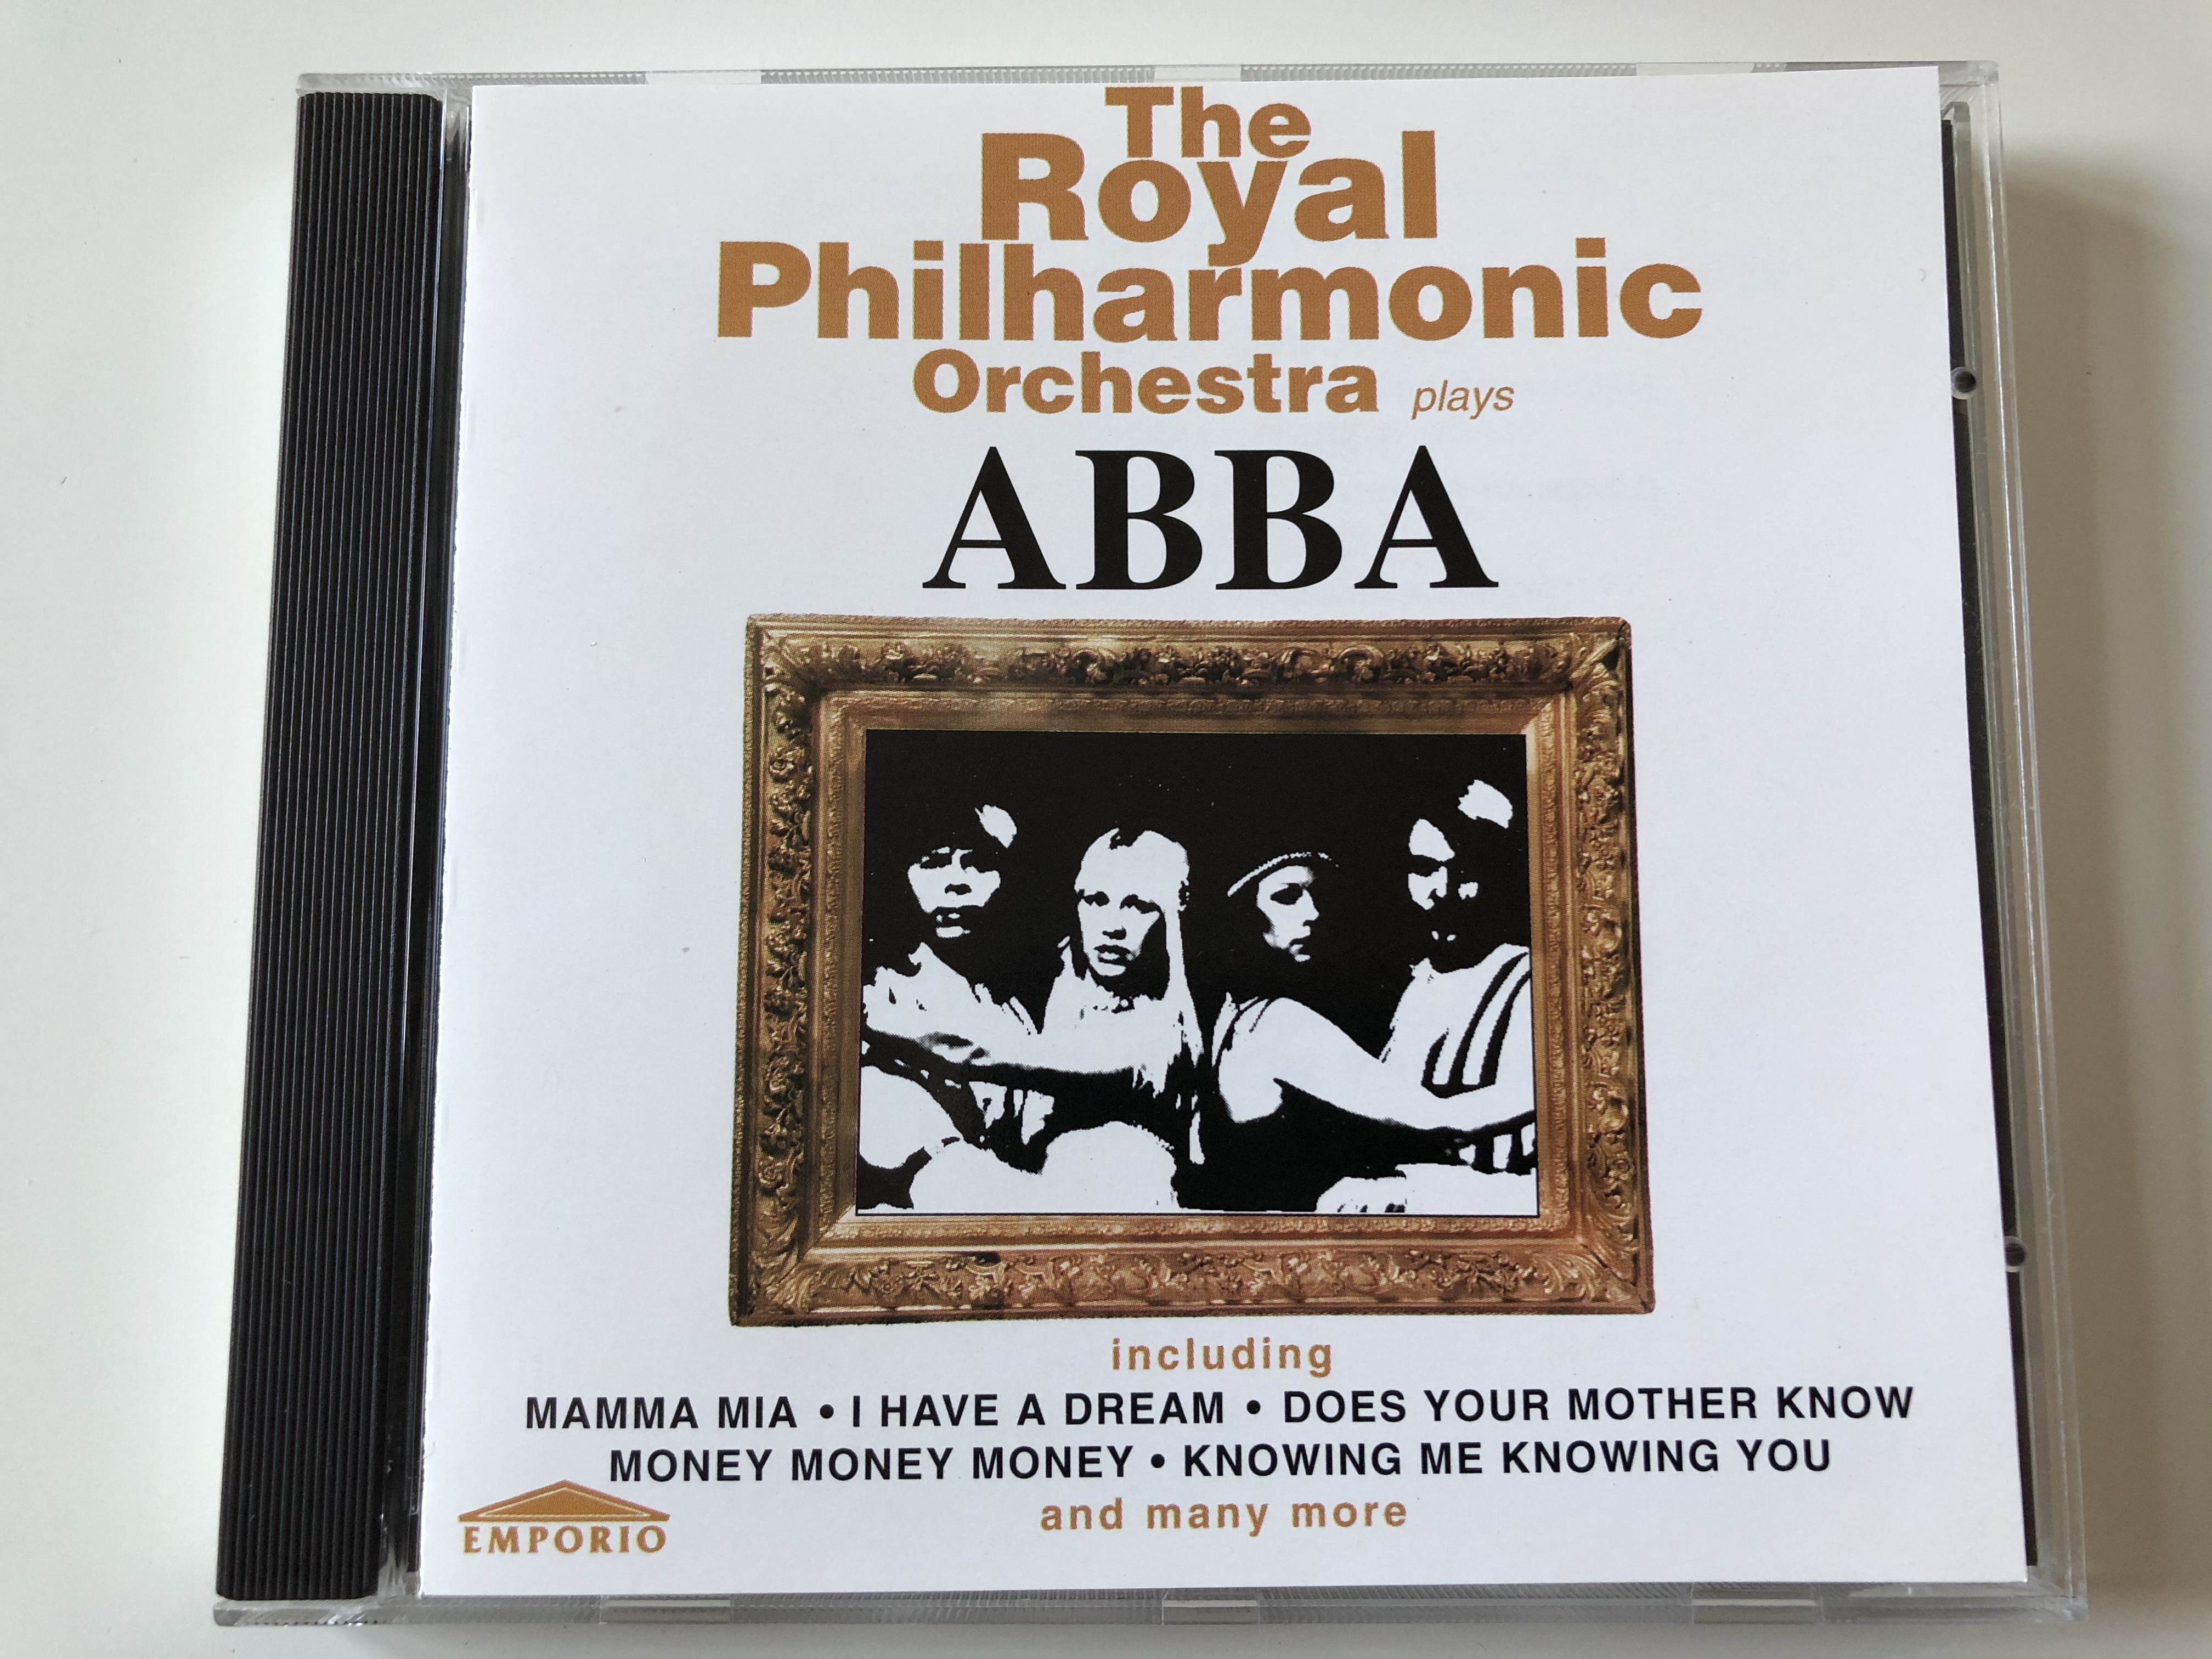 the-royal-philharmonic-orchestra-plays-abba-including-mamma-mia-i-have-a-dream-does-your-mother-know-money-money-money-knowing-me-knowing-you-and-many-more-emporio-audio-cd-1995-emprcd-1-.jpg